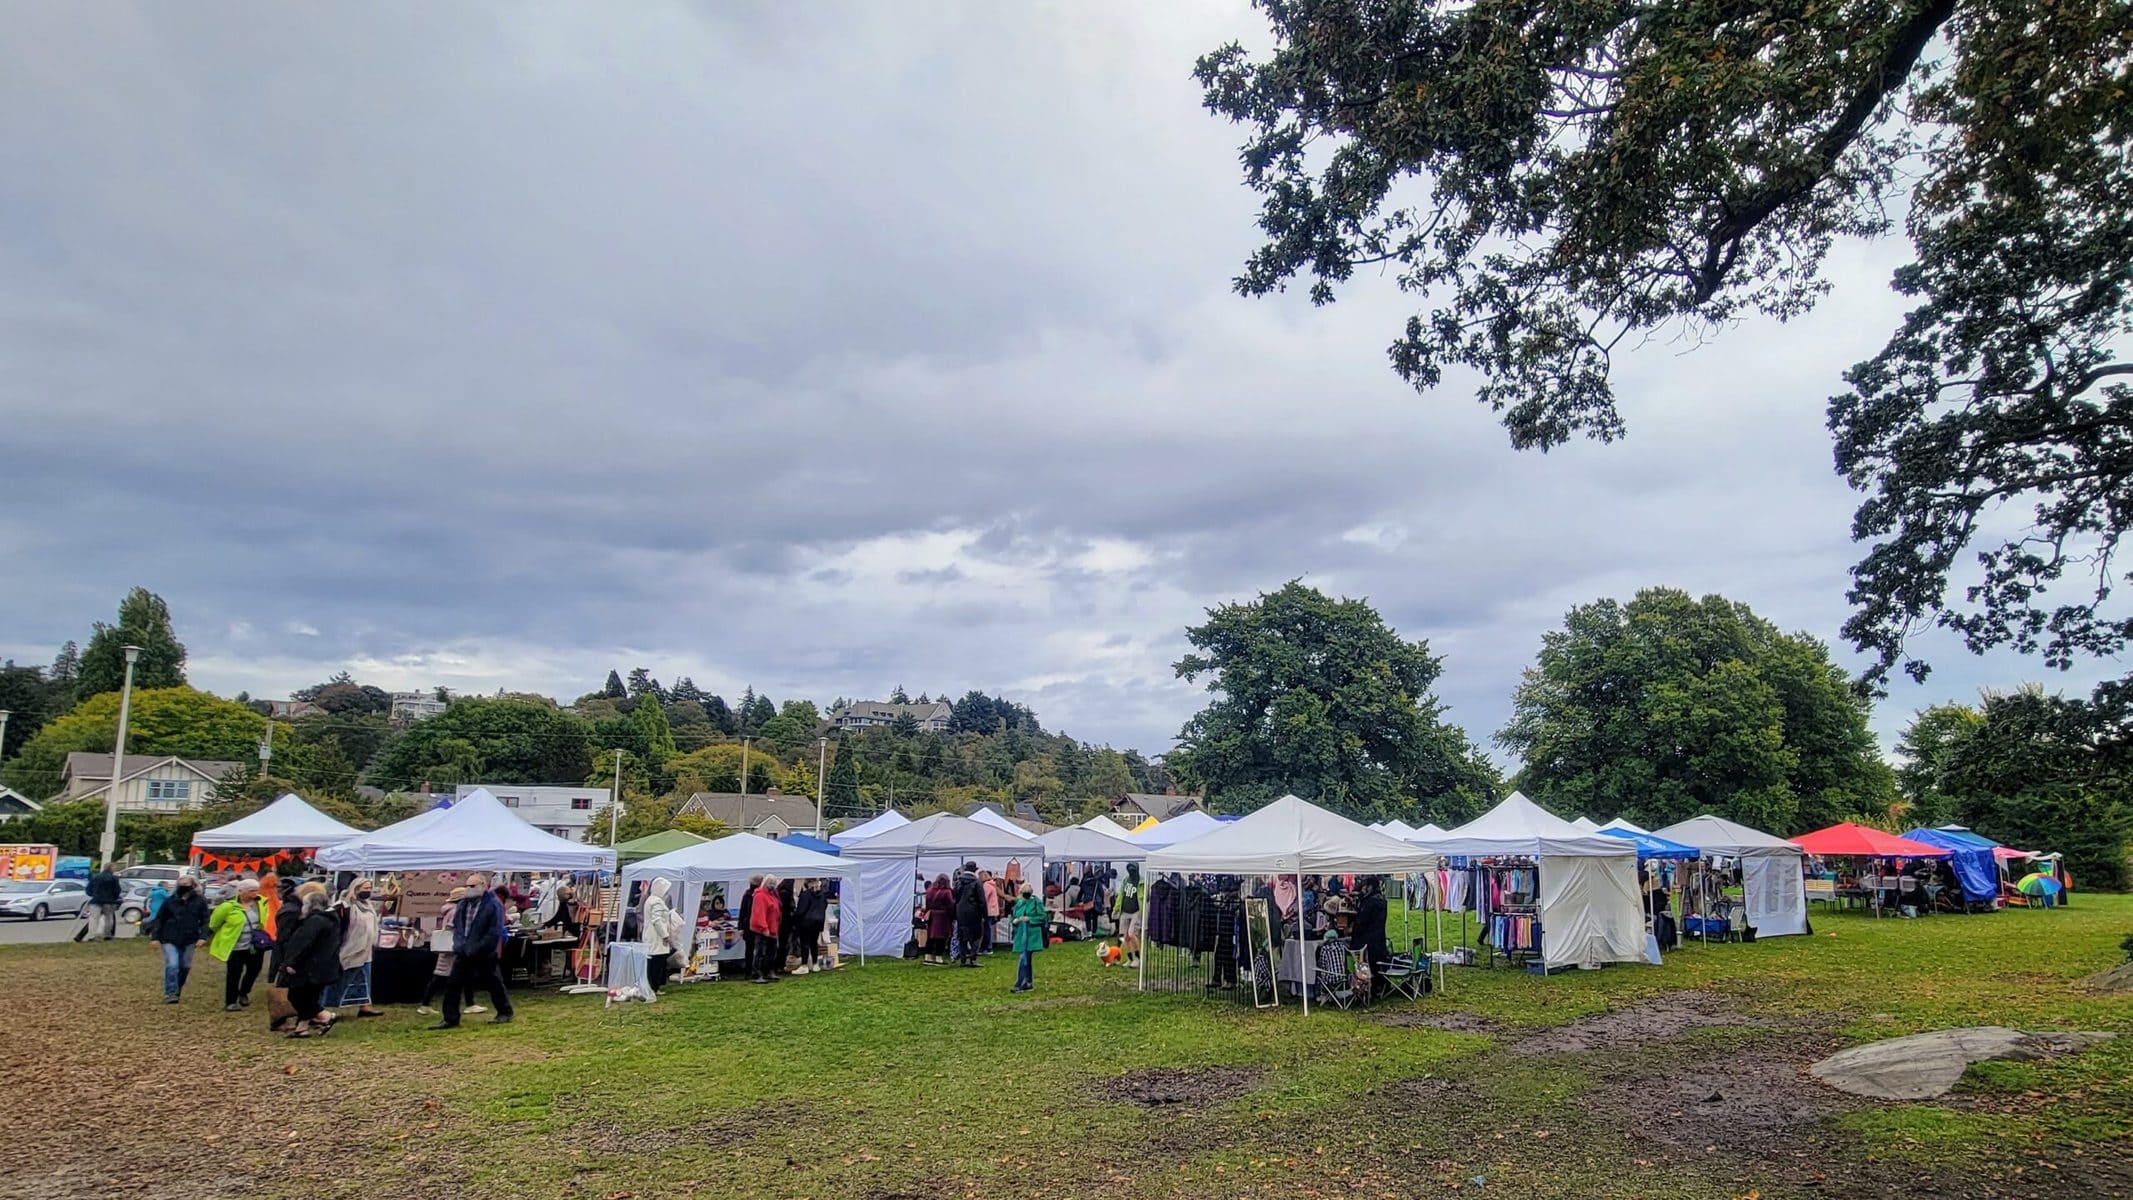 Image description: A view of outdoor tent booths at Fibrations Festival, under a cloudy sky.